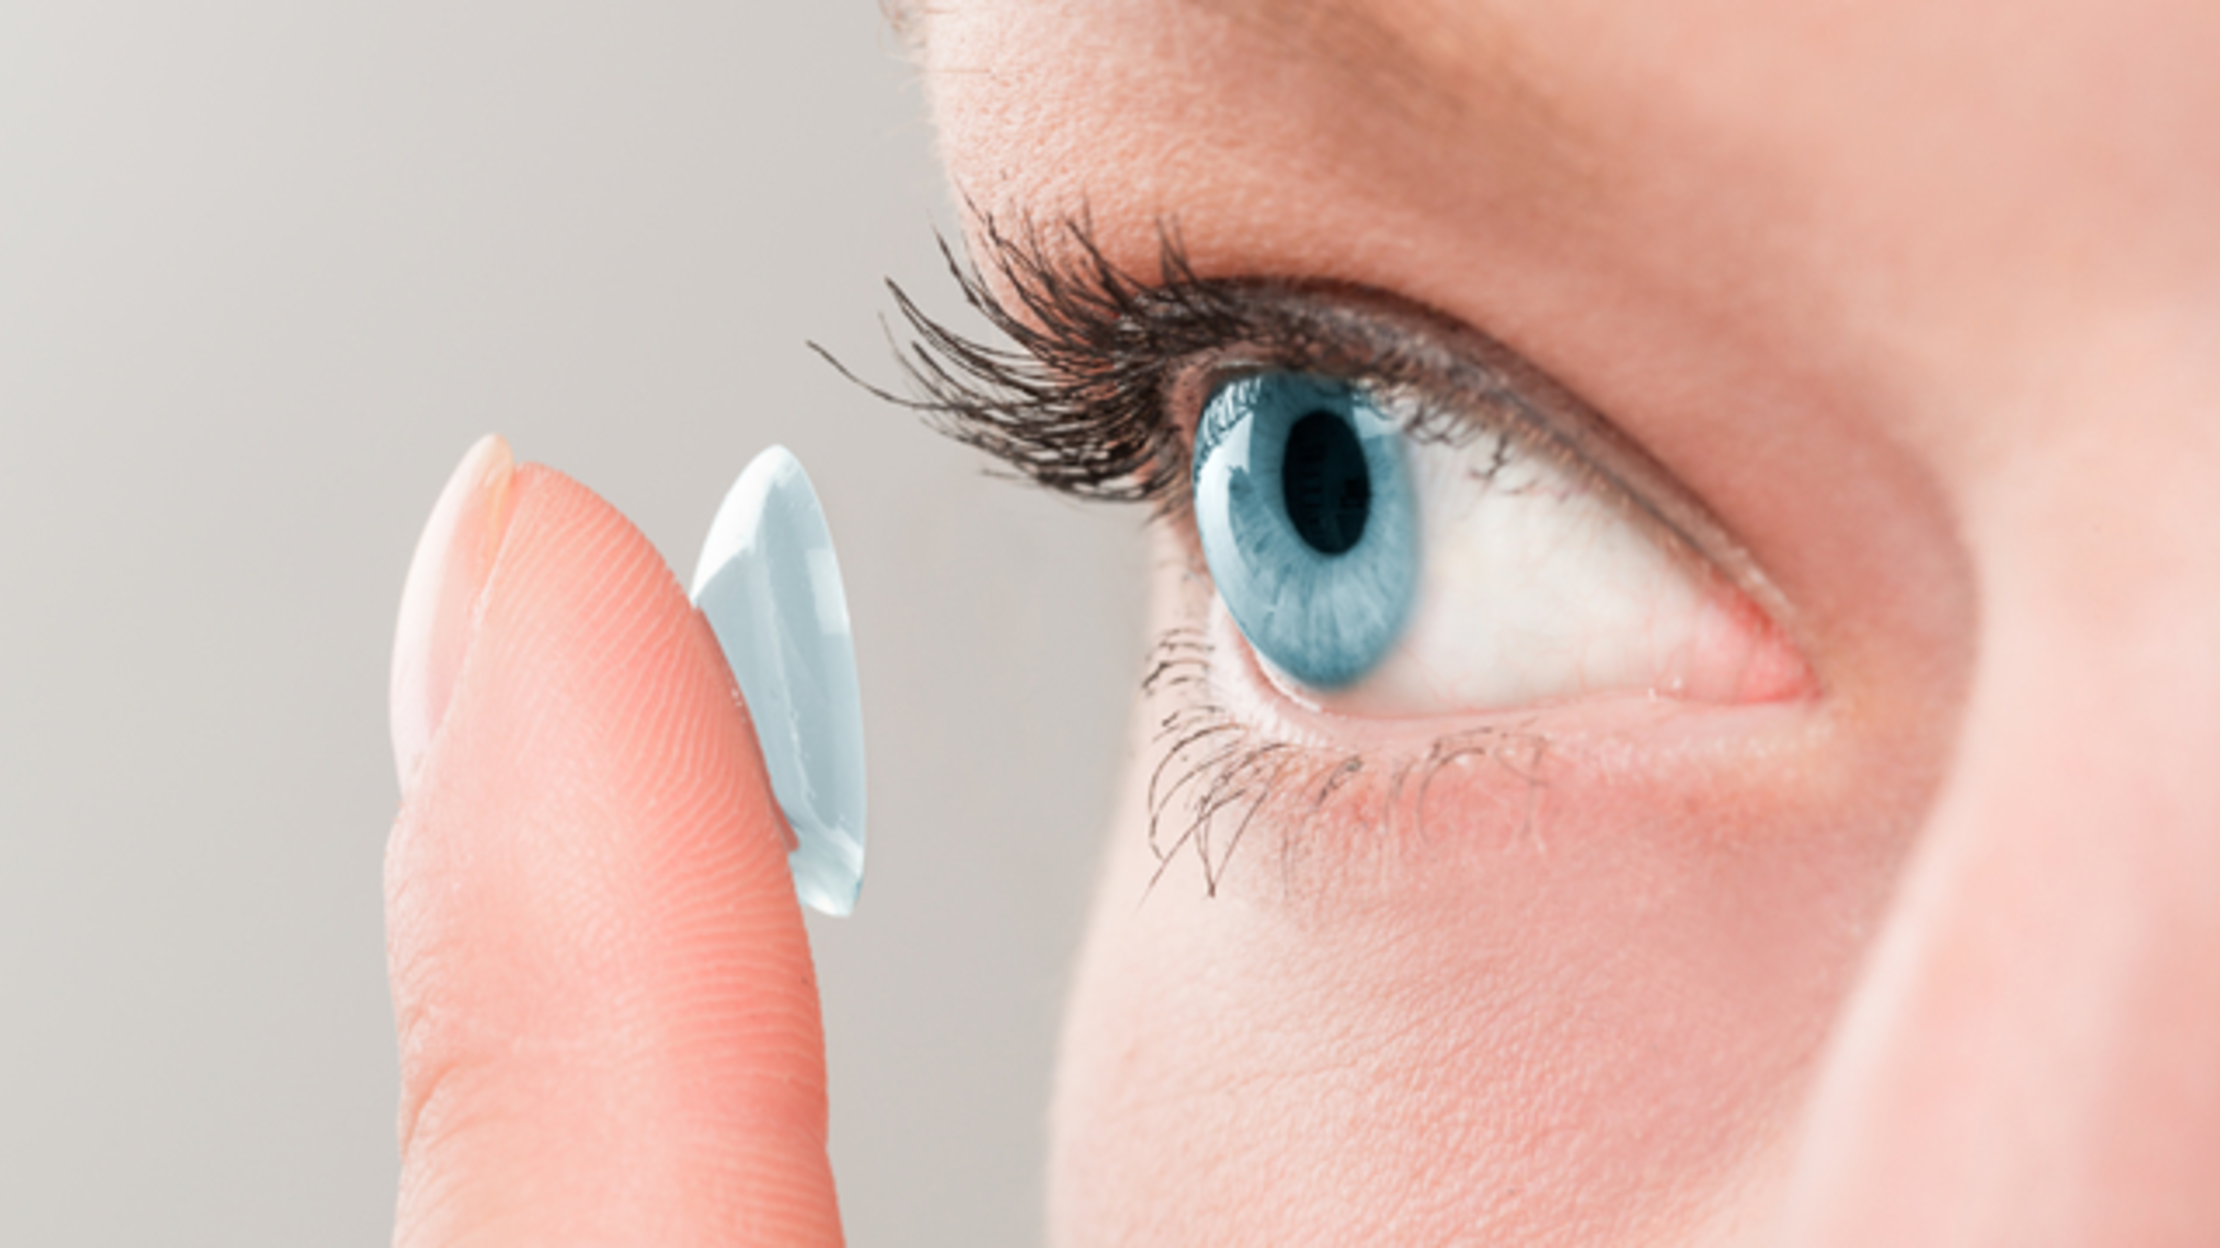 Bad Contact Lens Habits Can Cause Serious Eye Infections Mental Floss